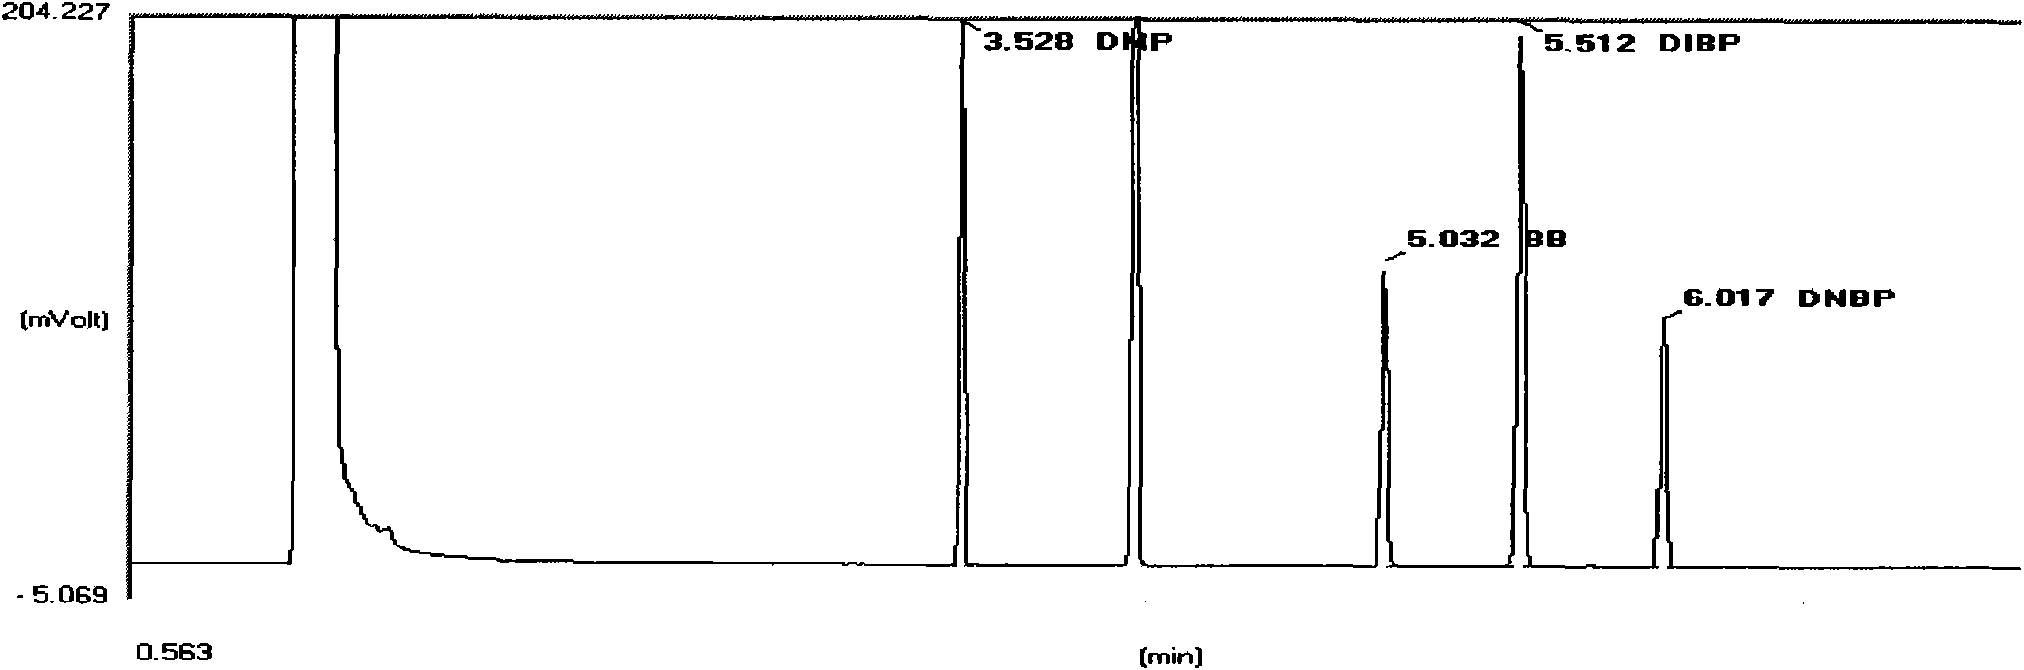 Method for measuring phthalic acid ester (PAE) in water-based adhesive for tobacco